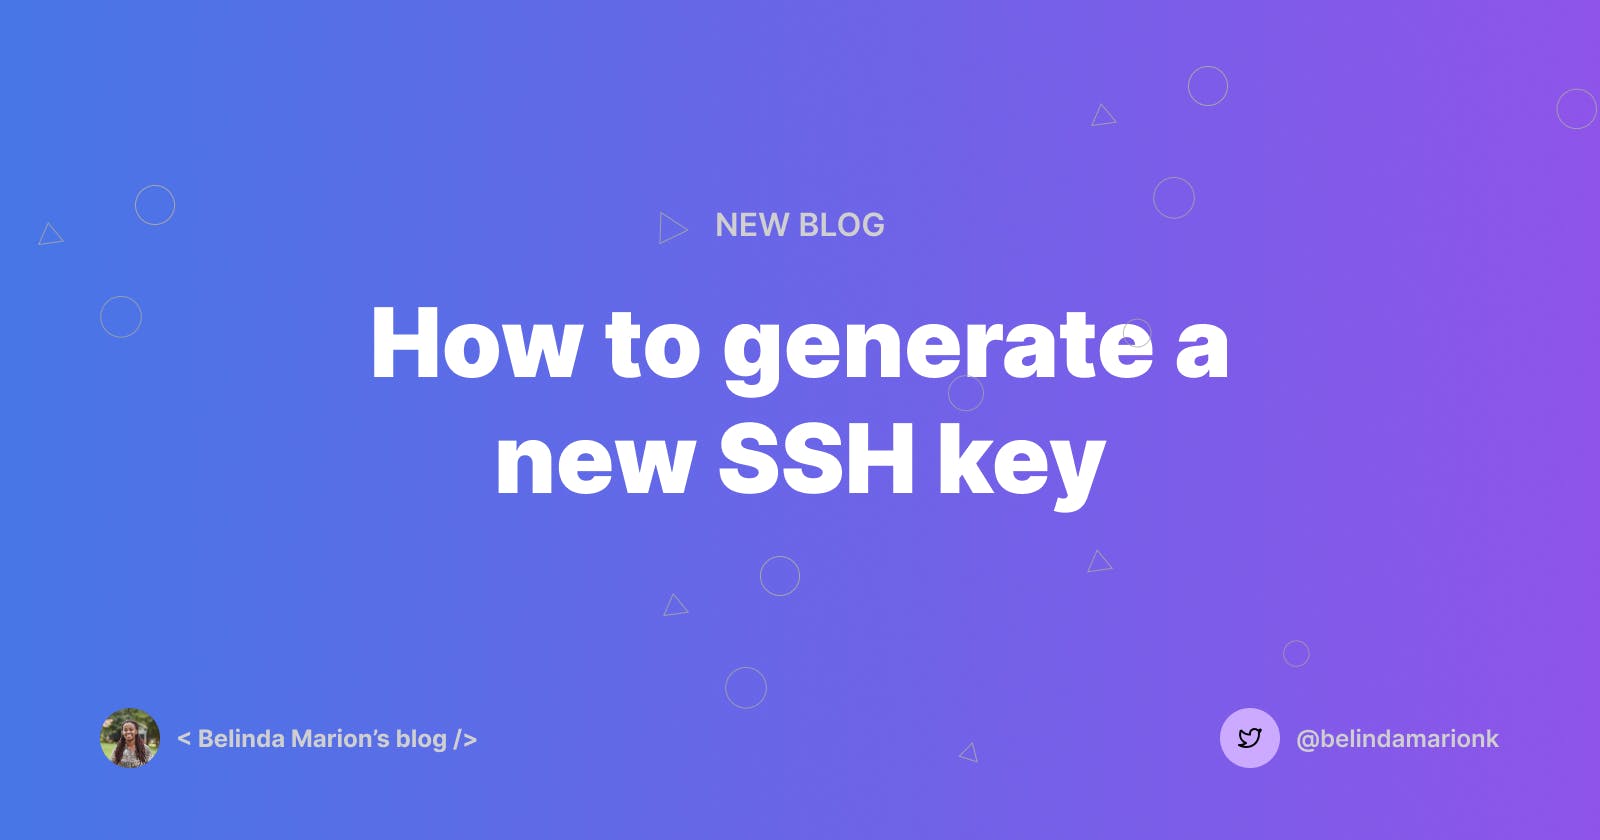 How to generate a new SSH key